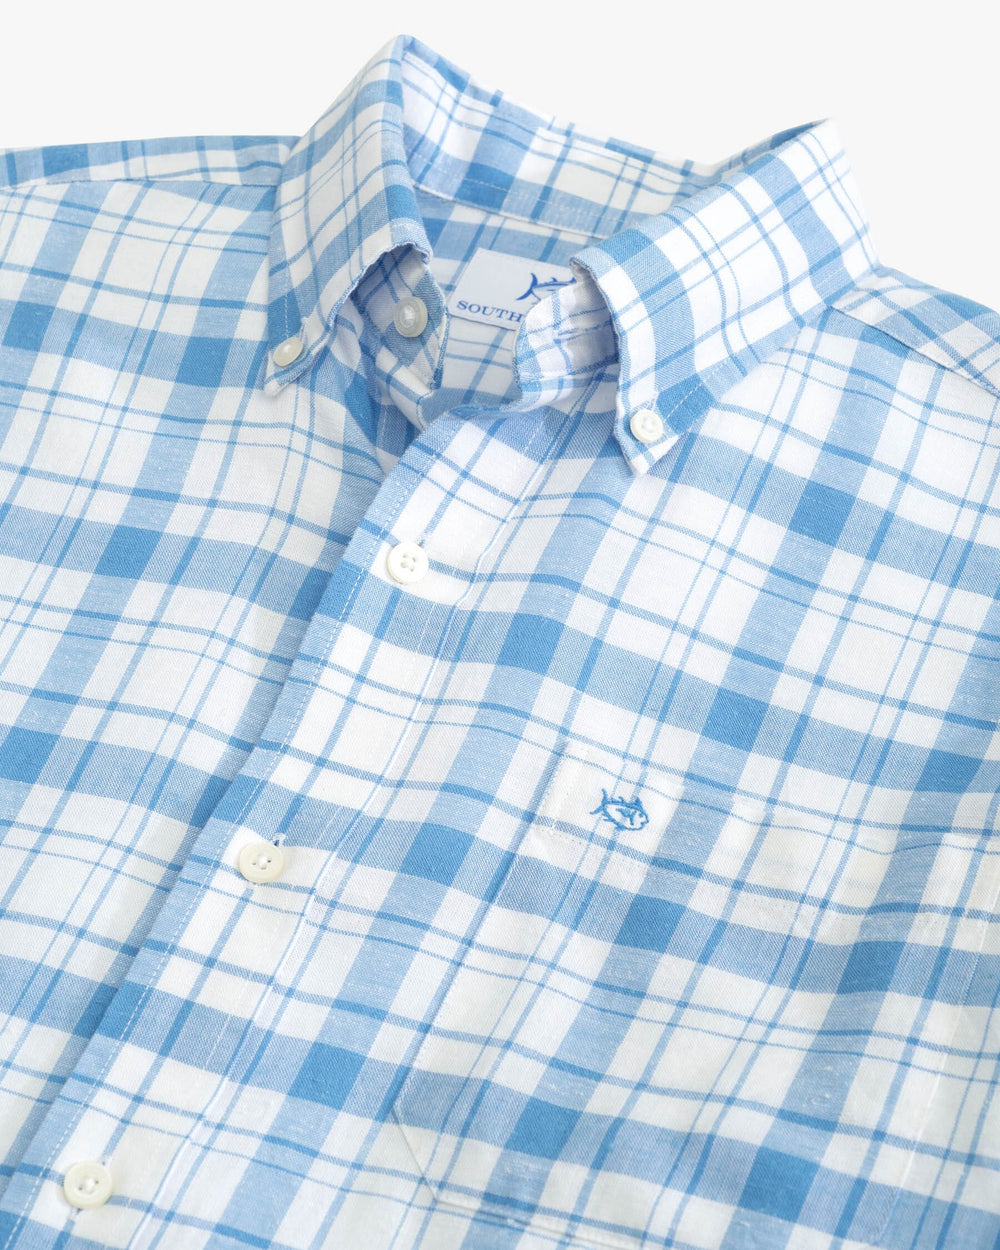 The detail view of the Southern Tide Headland Moultire Plaid Long Sleeve Sport Shirt by Southern Tide - Boat Blue